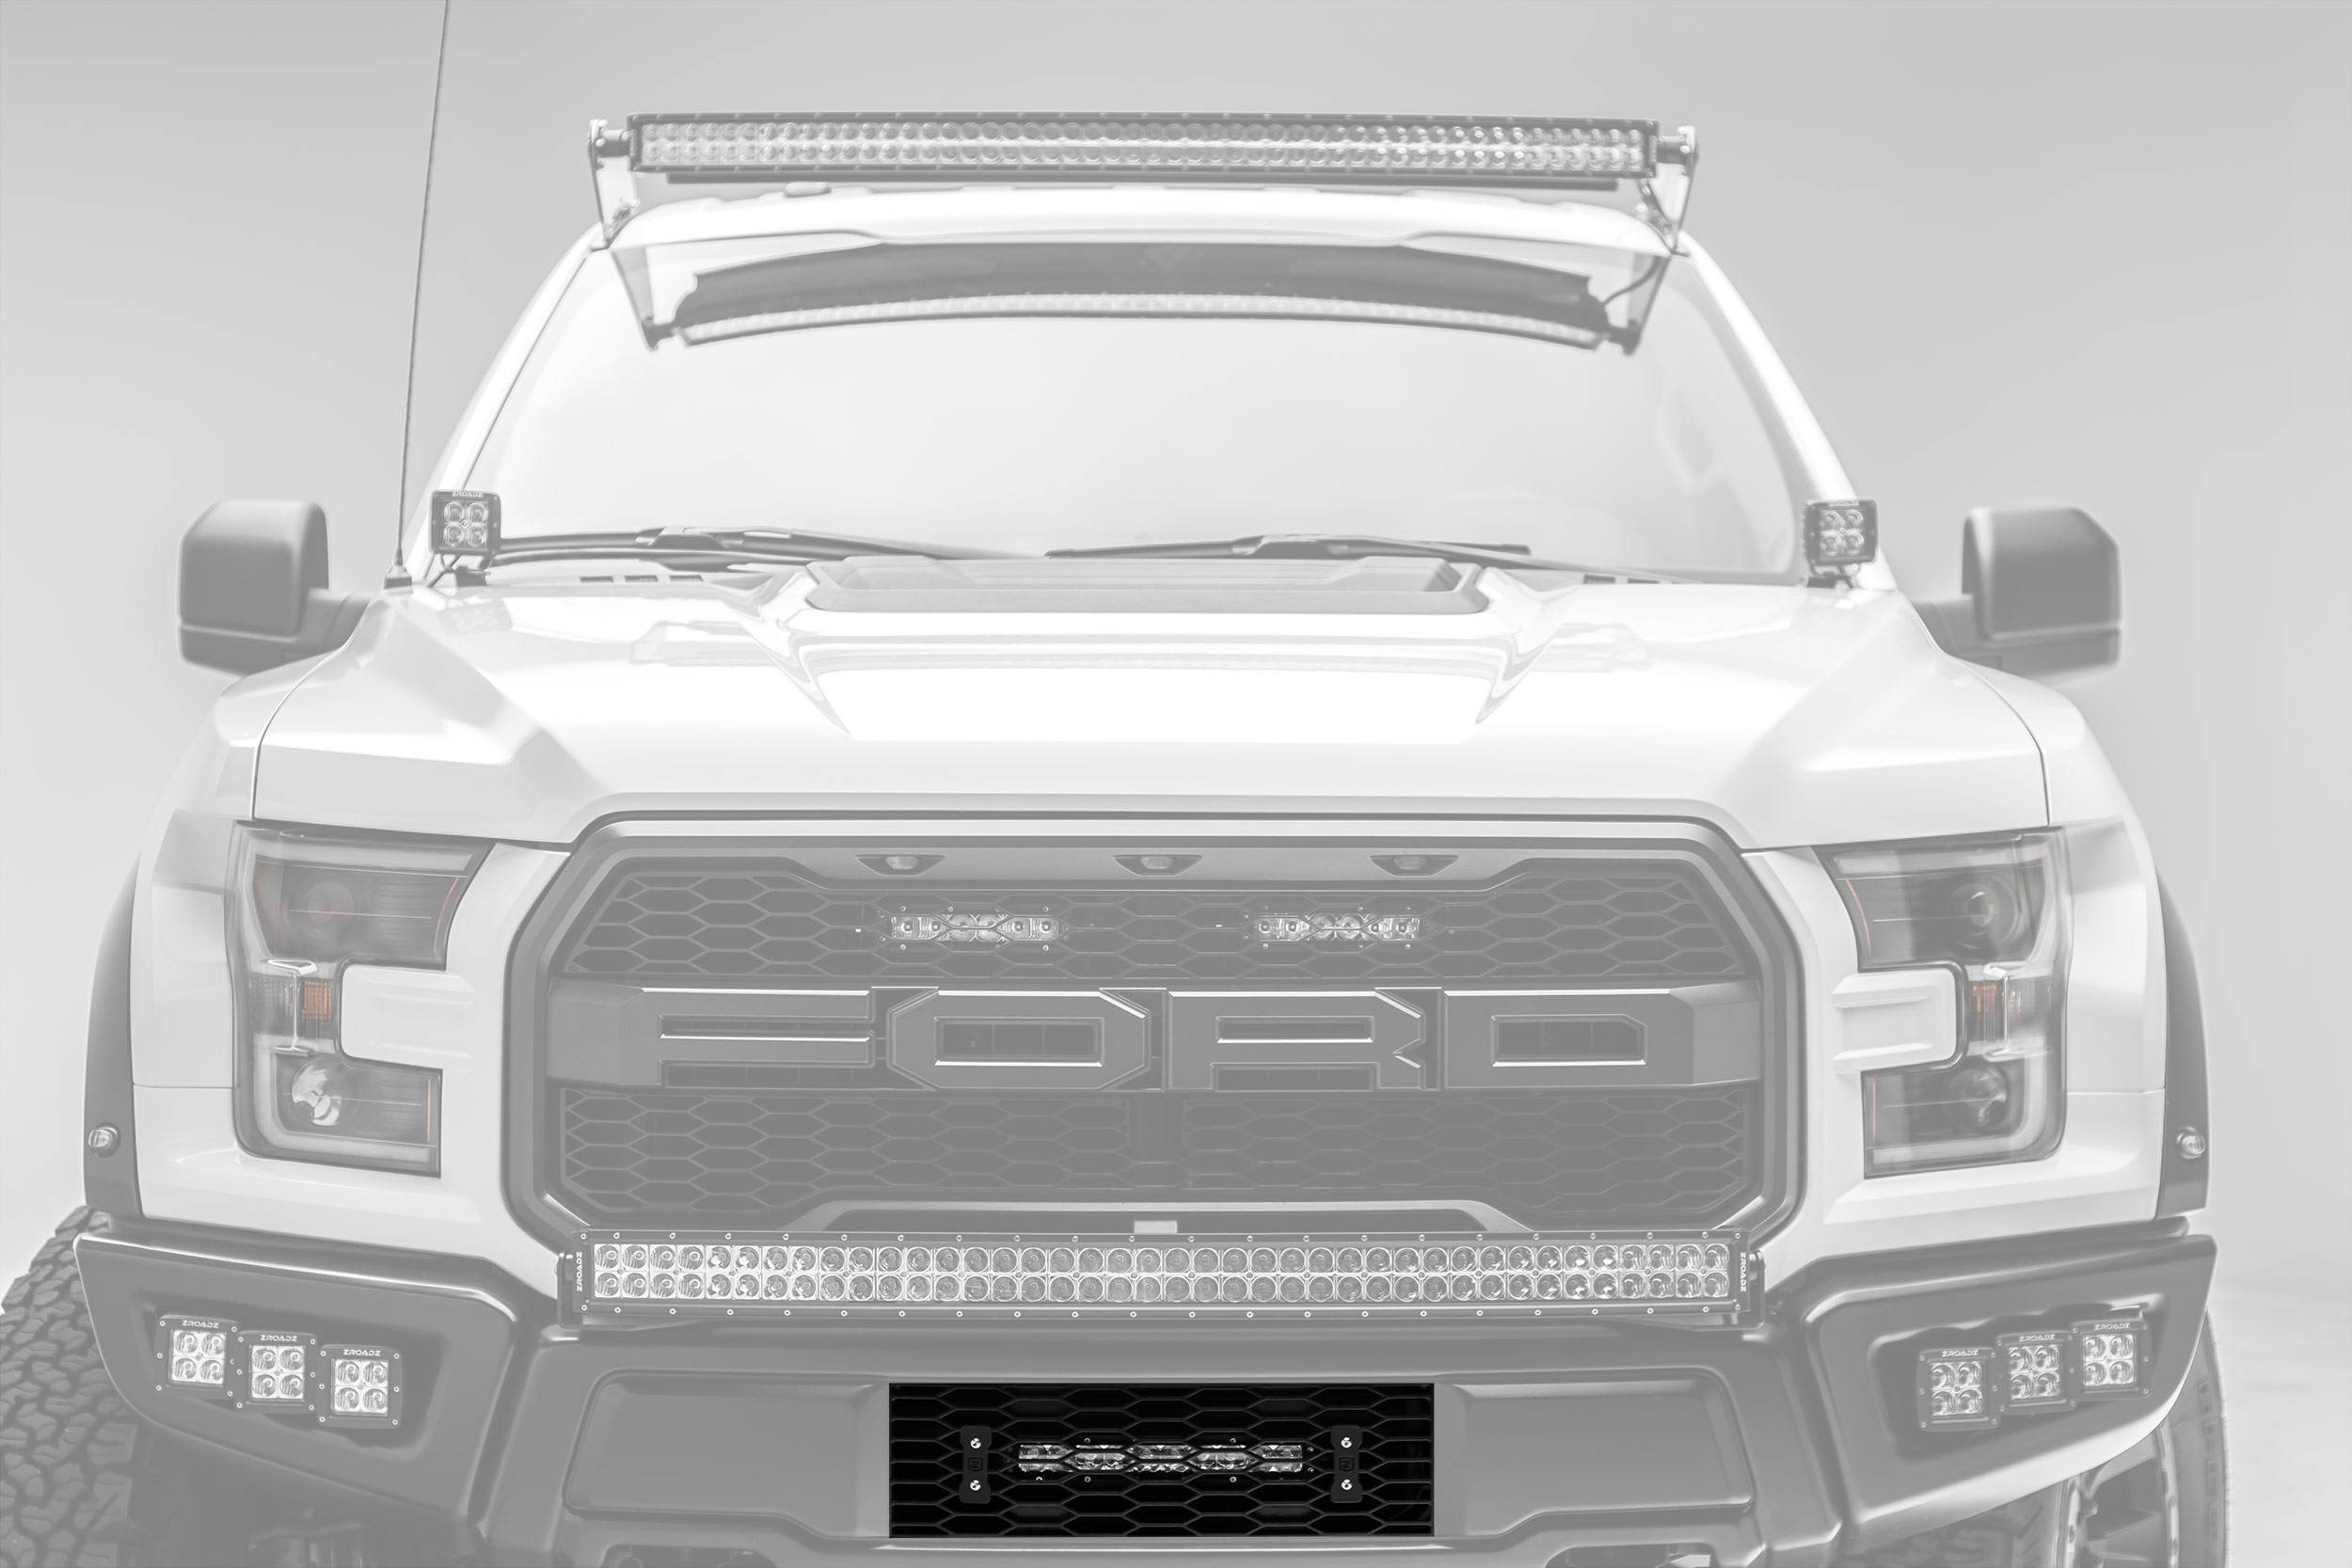 ZROADZ OFF ROAD PRODUCTS - 2017-2021 Ford F-150 Raptor OEM Bumper Grille LED Kit with 10 Inch LED Single Row Slim Light Bar - PN #Z415661-KIT